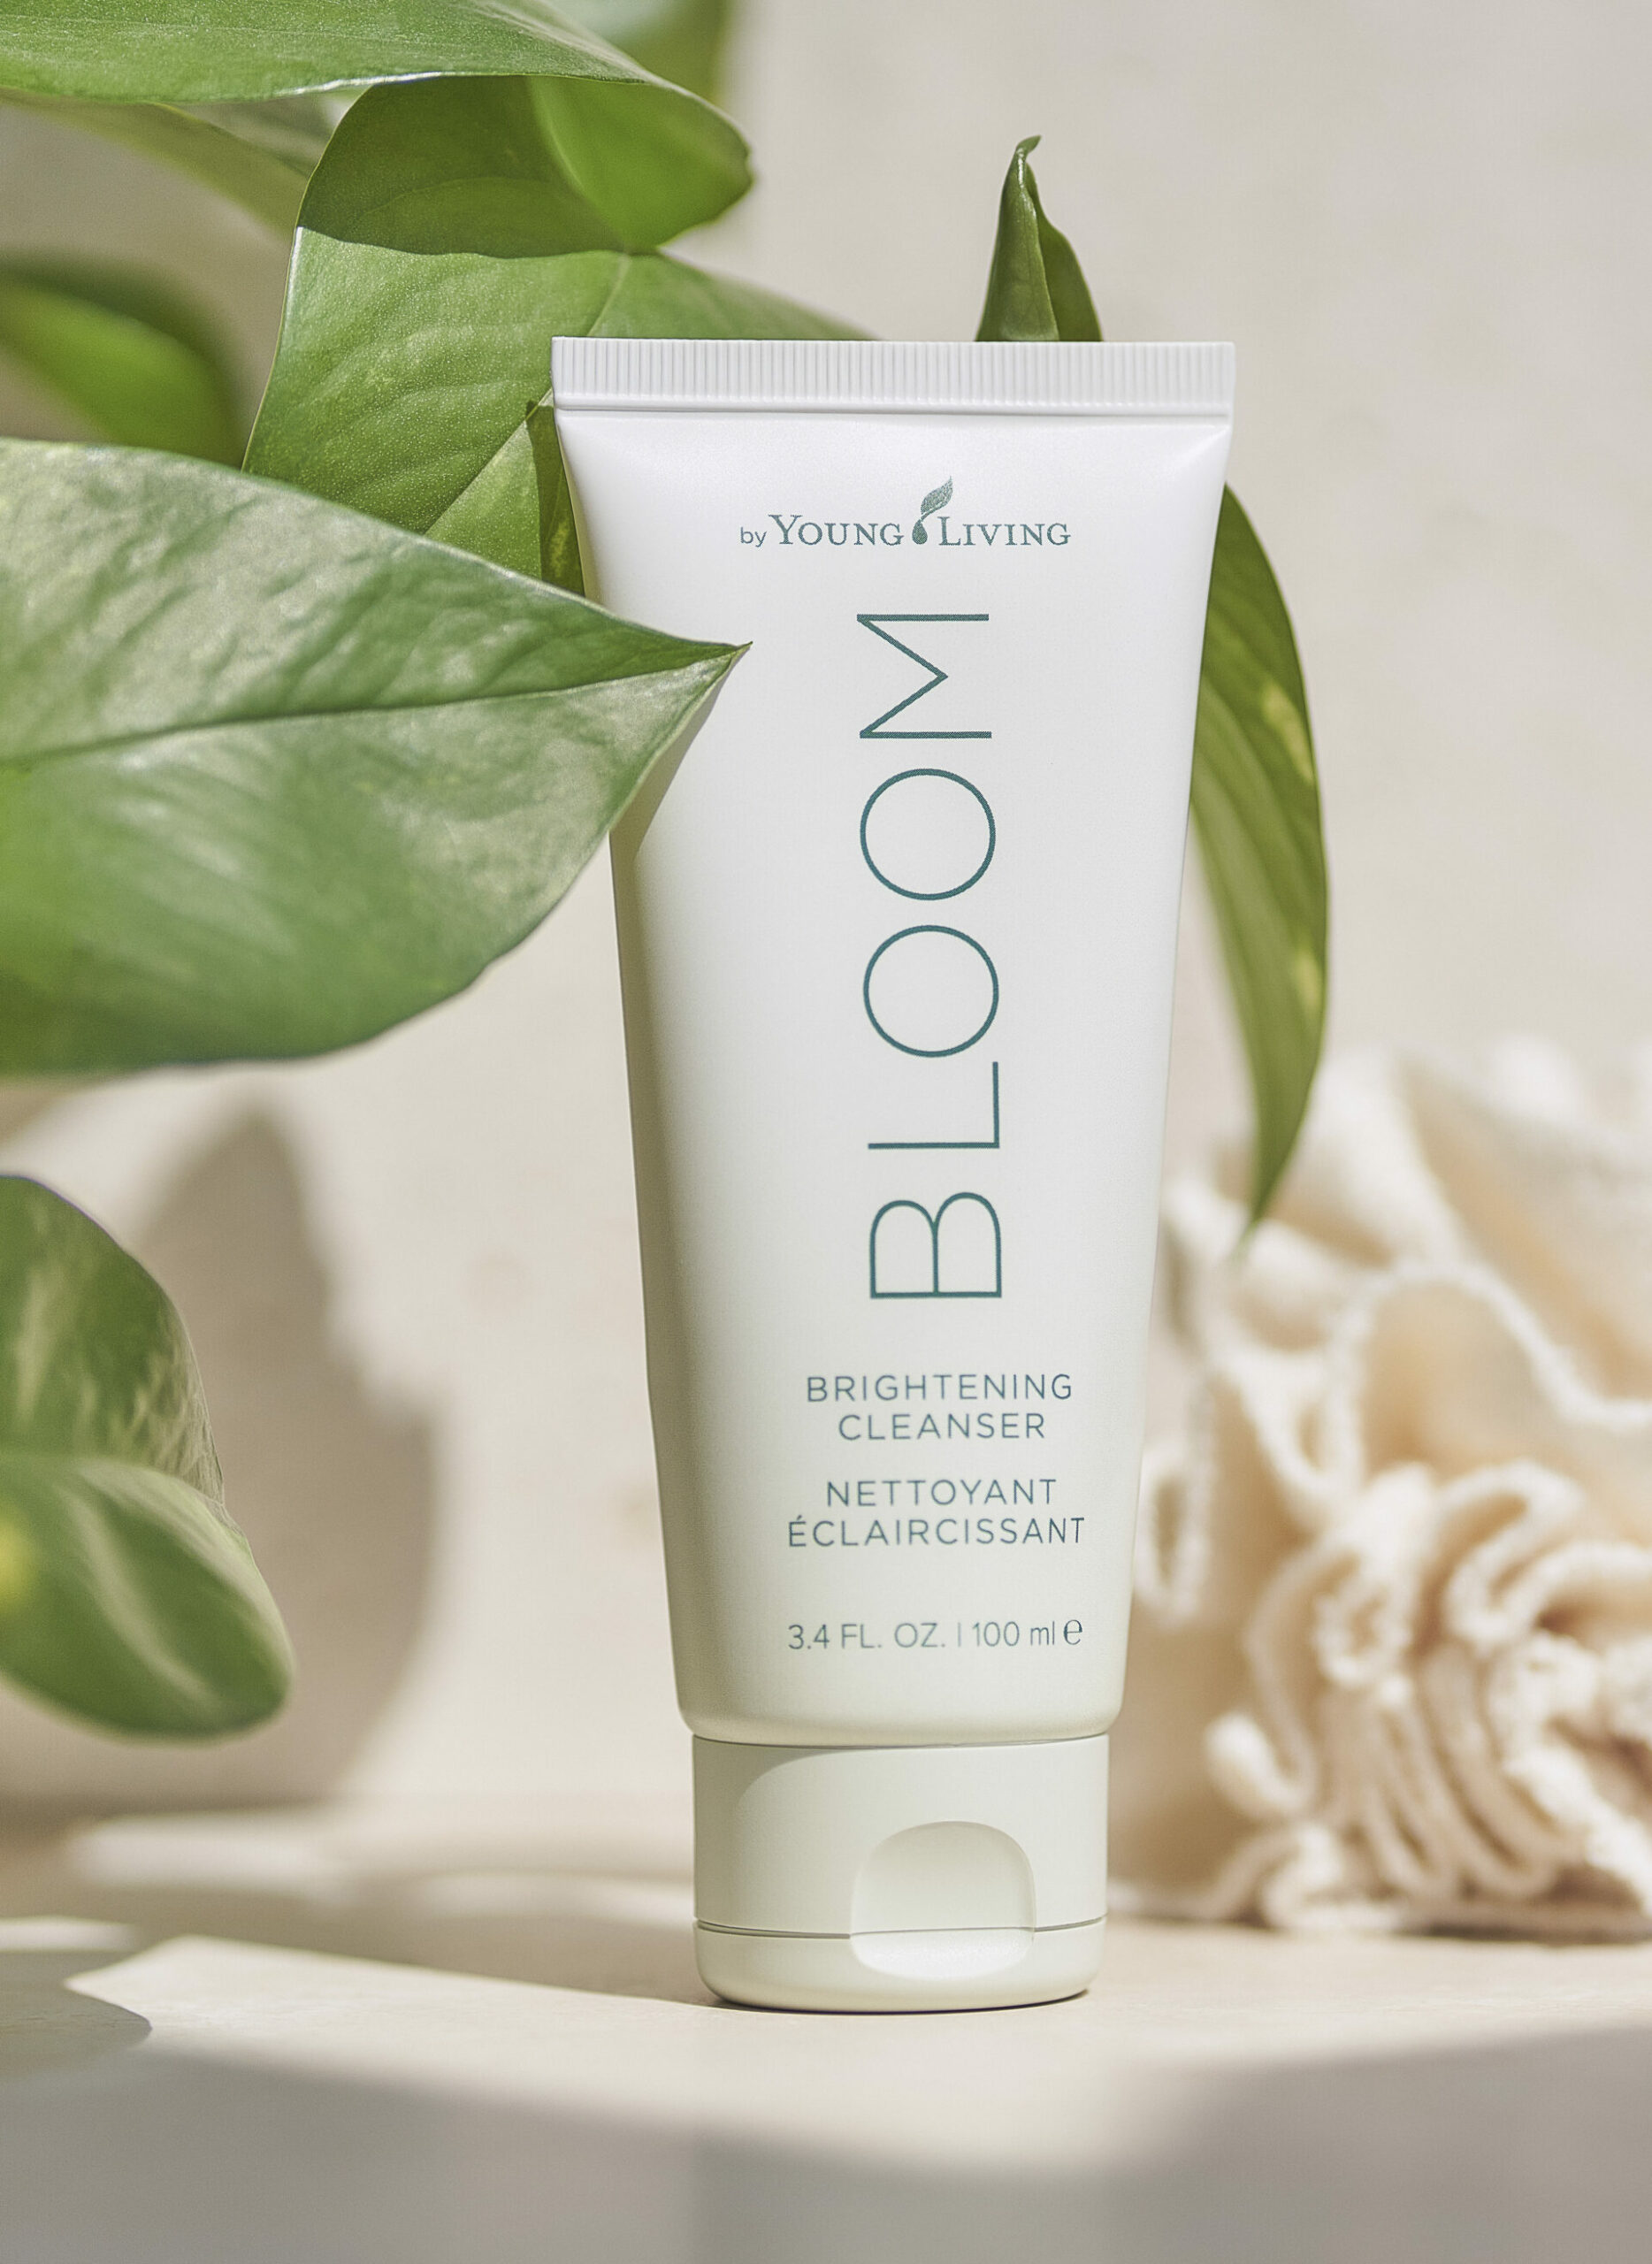 BLOOM Brightening Cleanser sitting on countertop with plan and fabric loofah - Young Living Lavender Life Blog 